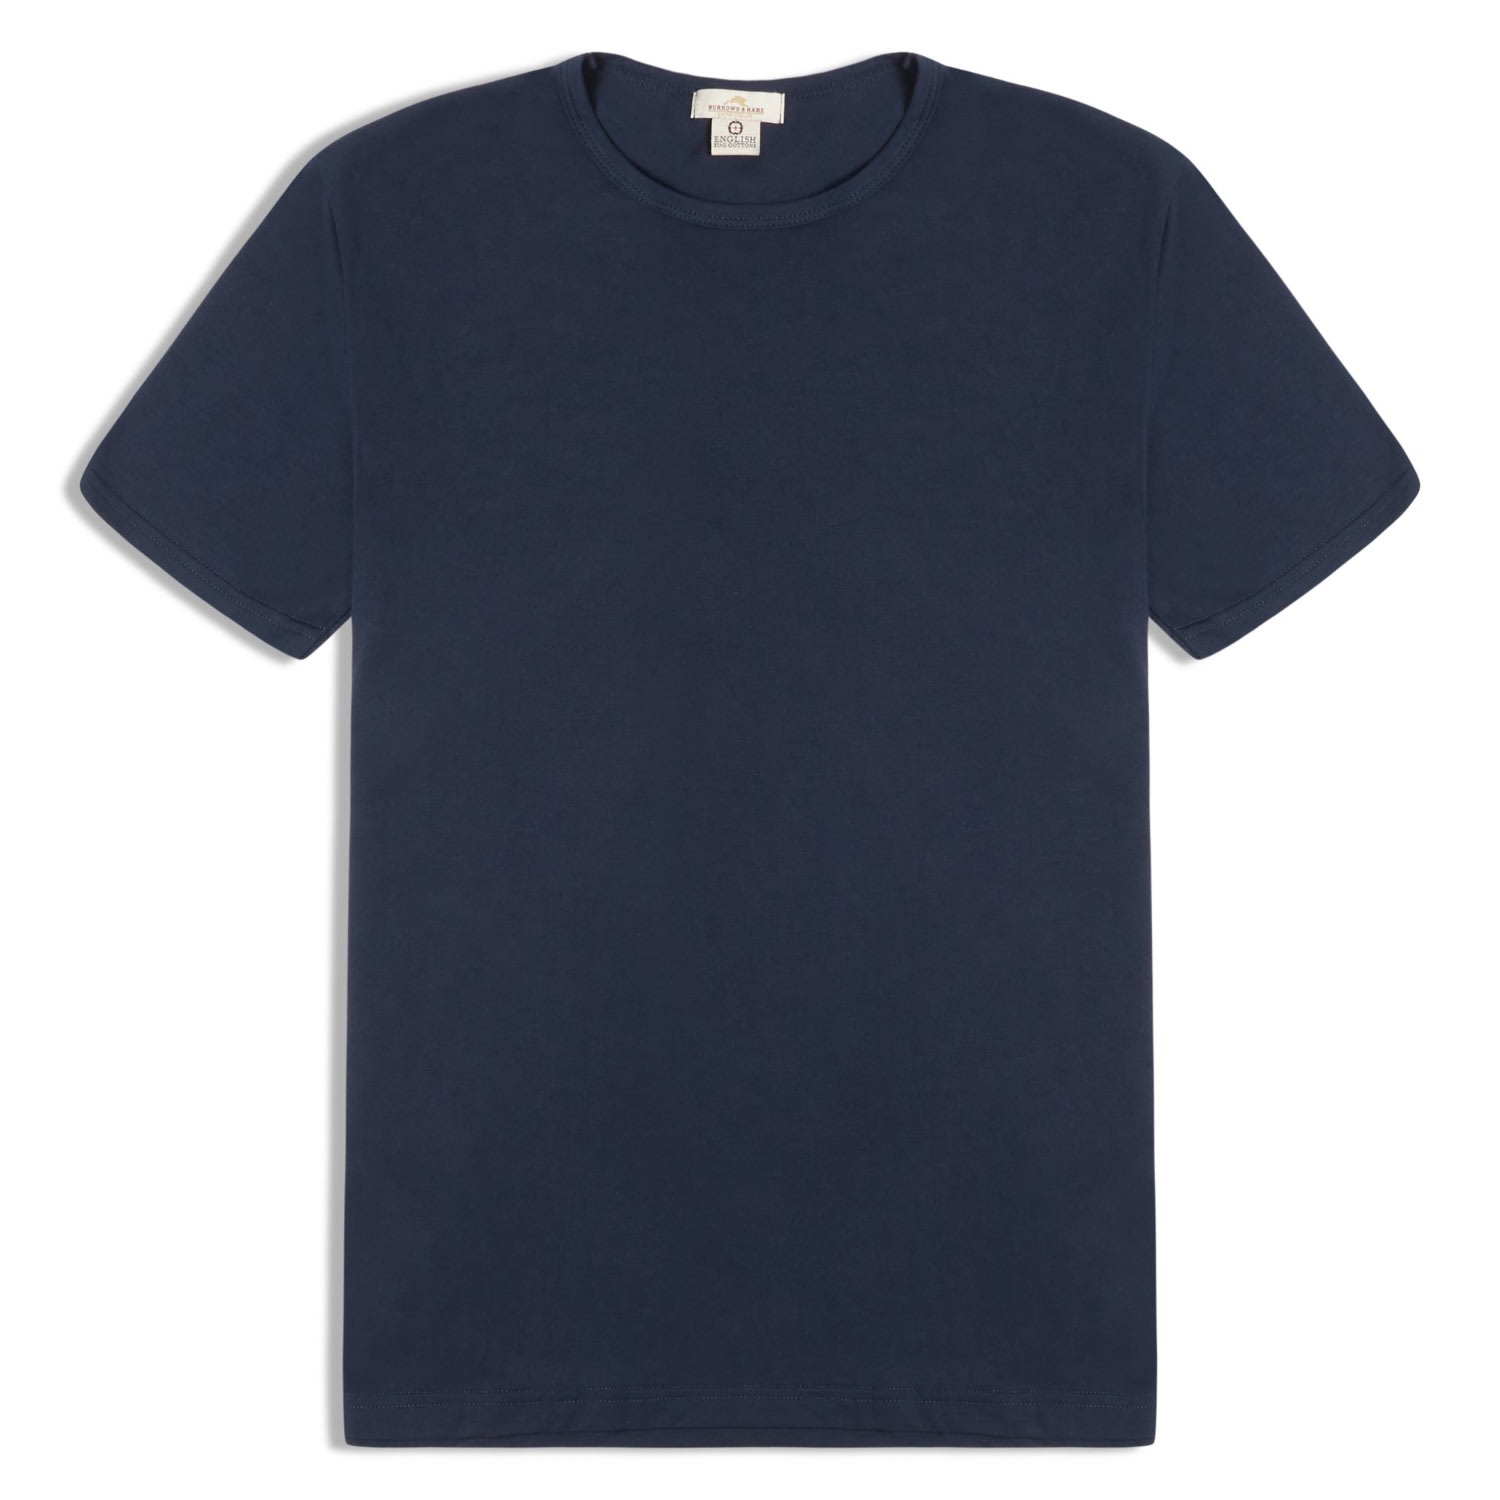 Burrows And Hare Men's Blue T-shirt - Navy